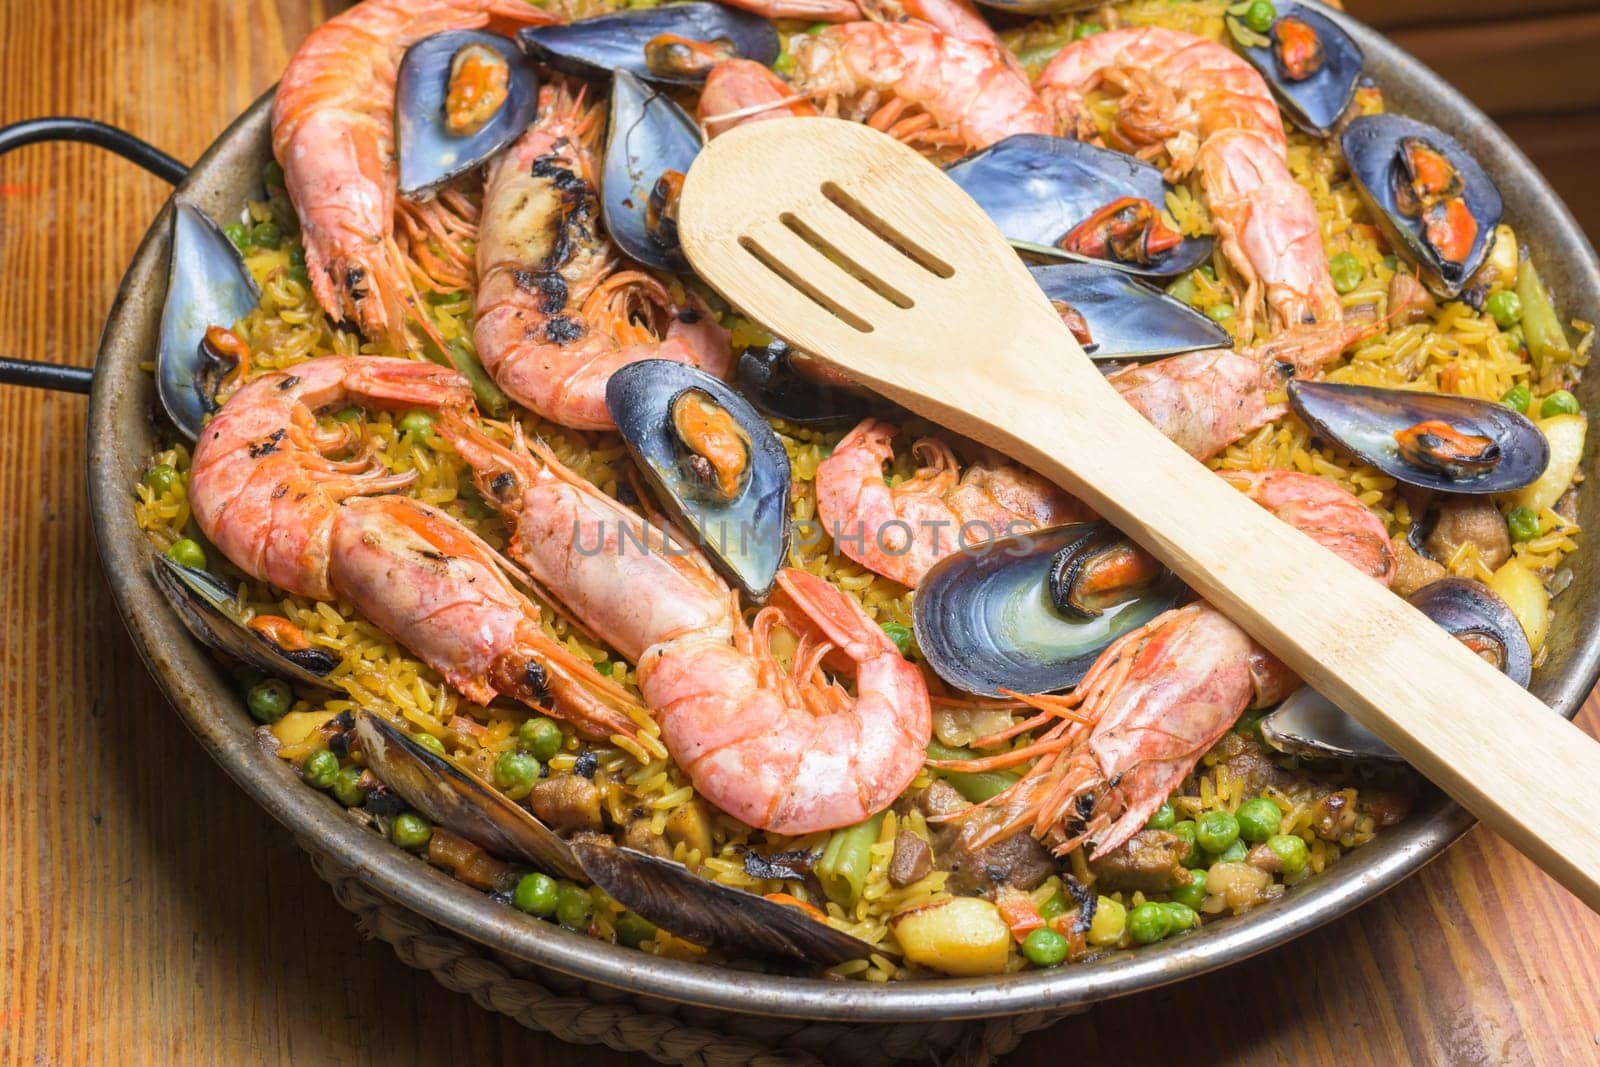 A paella full of seafood, peas, and rice served in a pan with a wooden spoon, typical Spanish cuisine, Majorca, Balearic Islands, Spain,